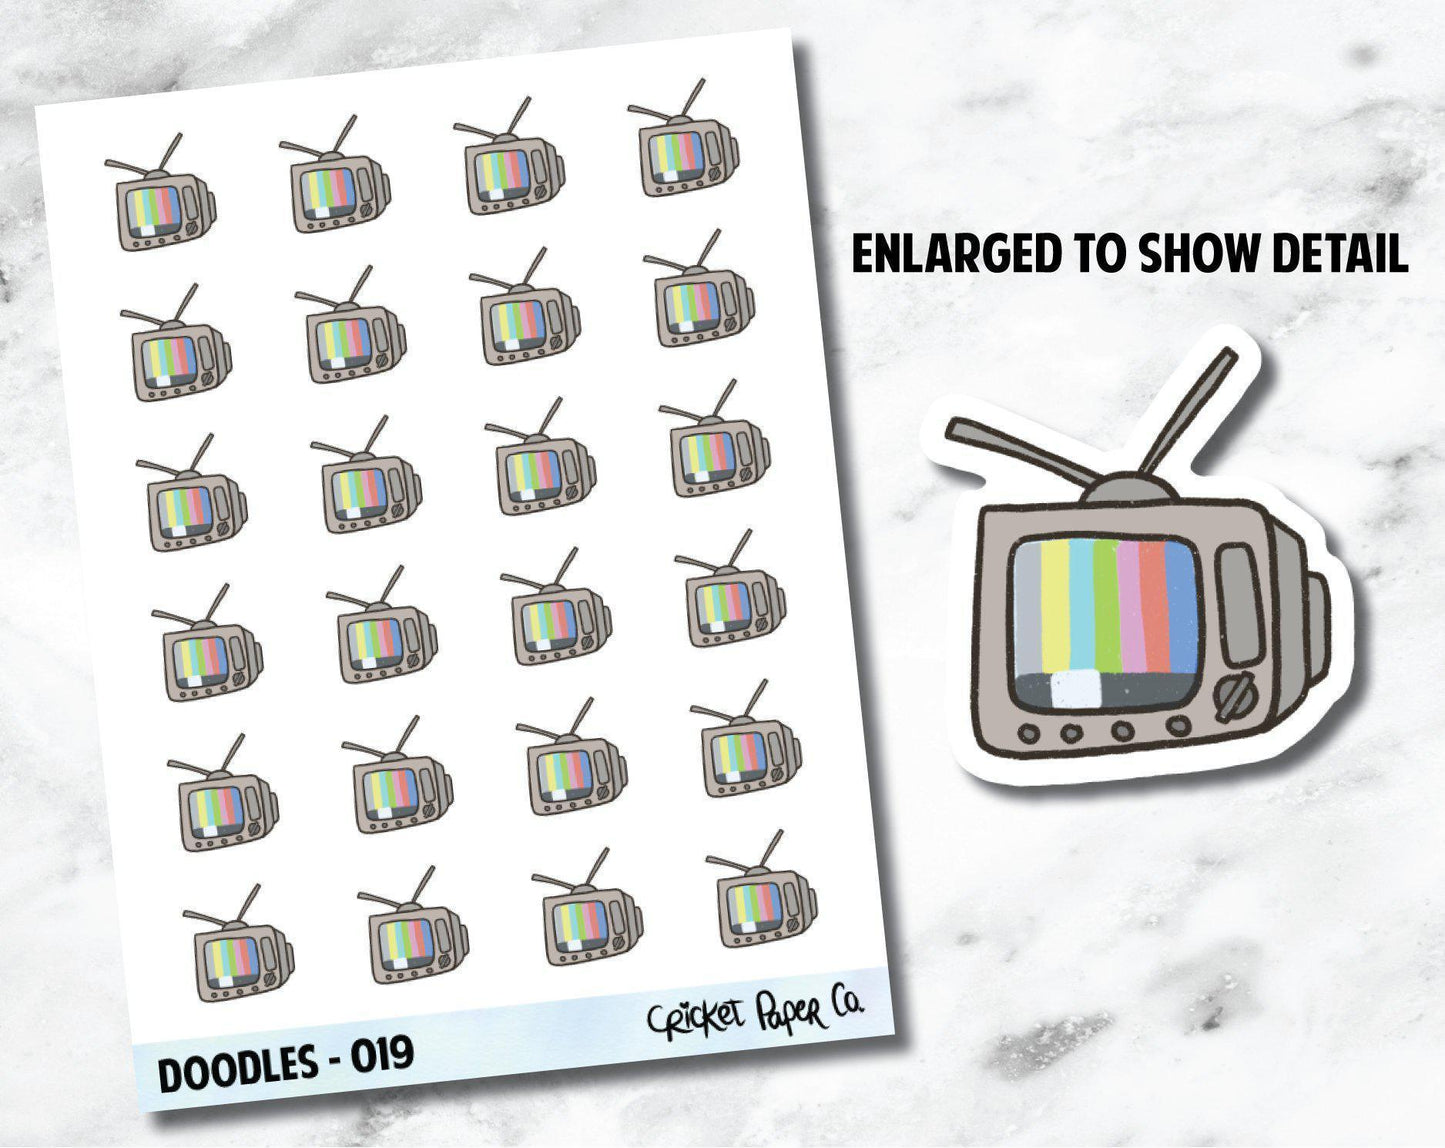 TV, Television, Cable Bill, TV Show Hand Drawn Doodles - 019-Cricket Paper Co.